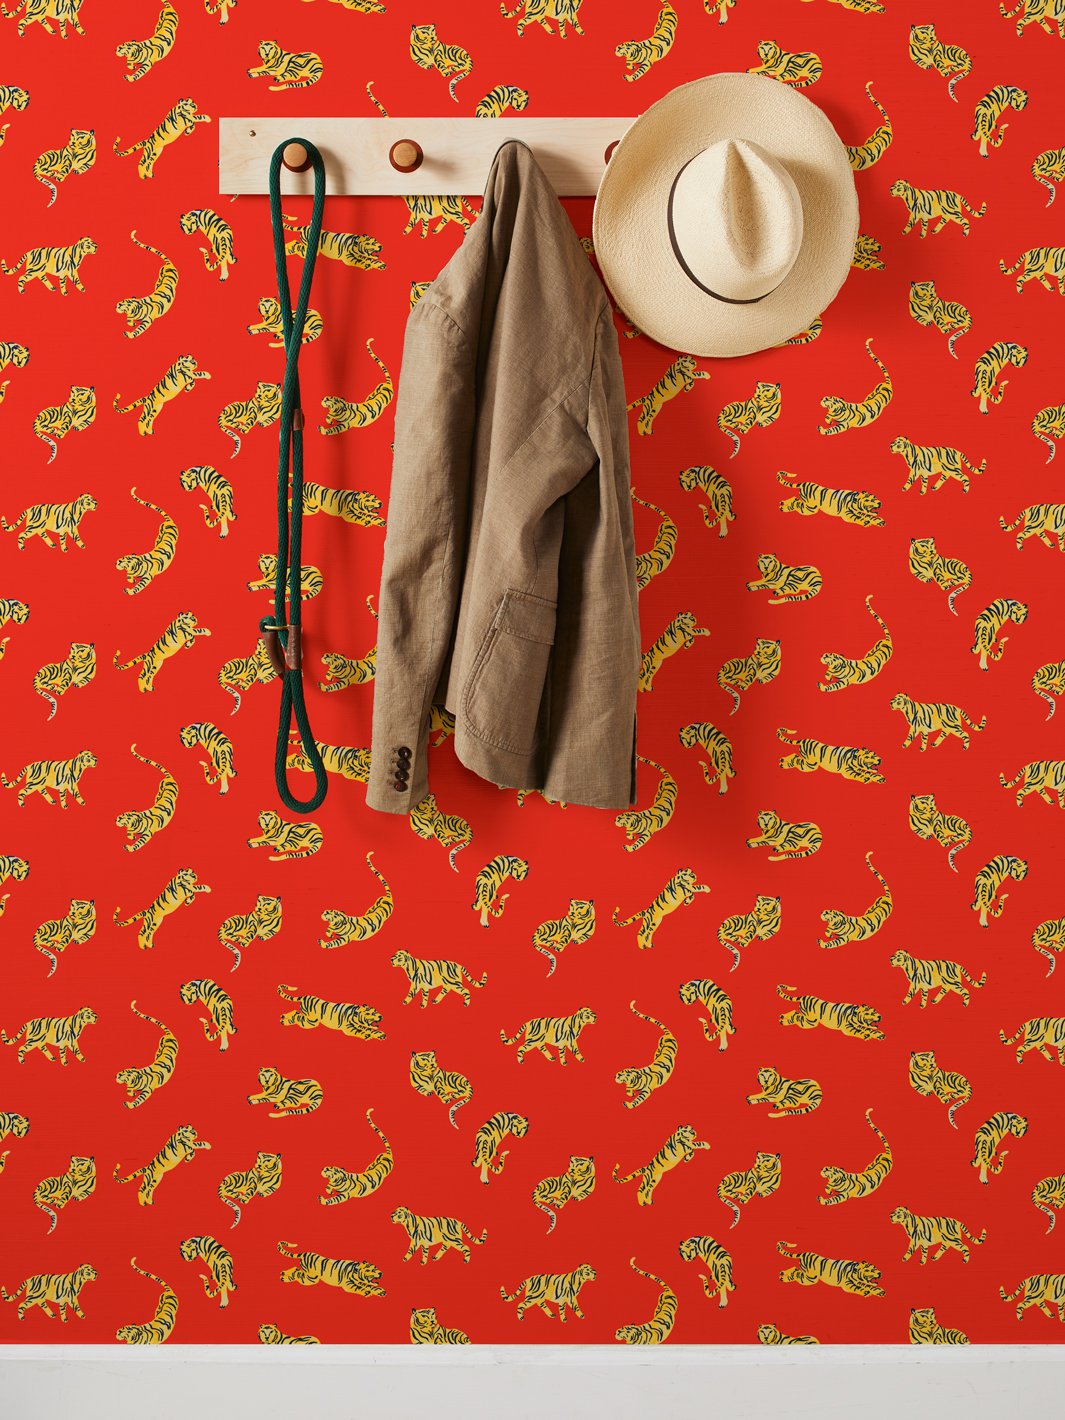 'Tigers' Grasscloth' Wallpaper by Tea Collection - Red